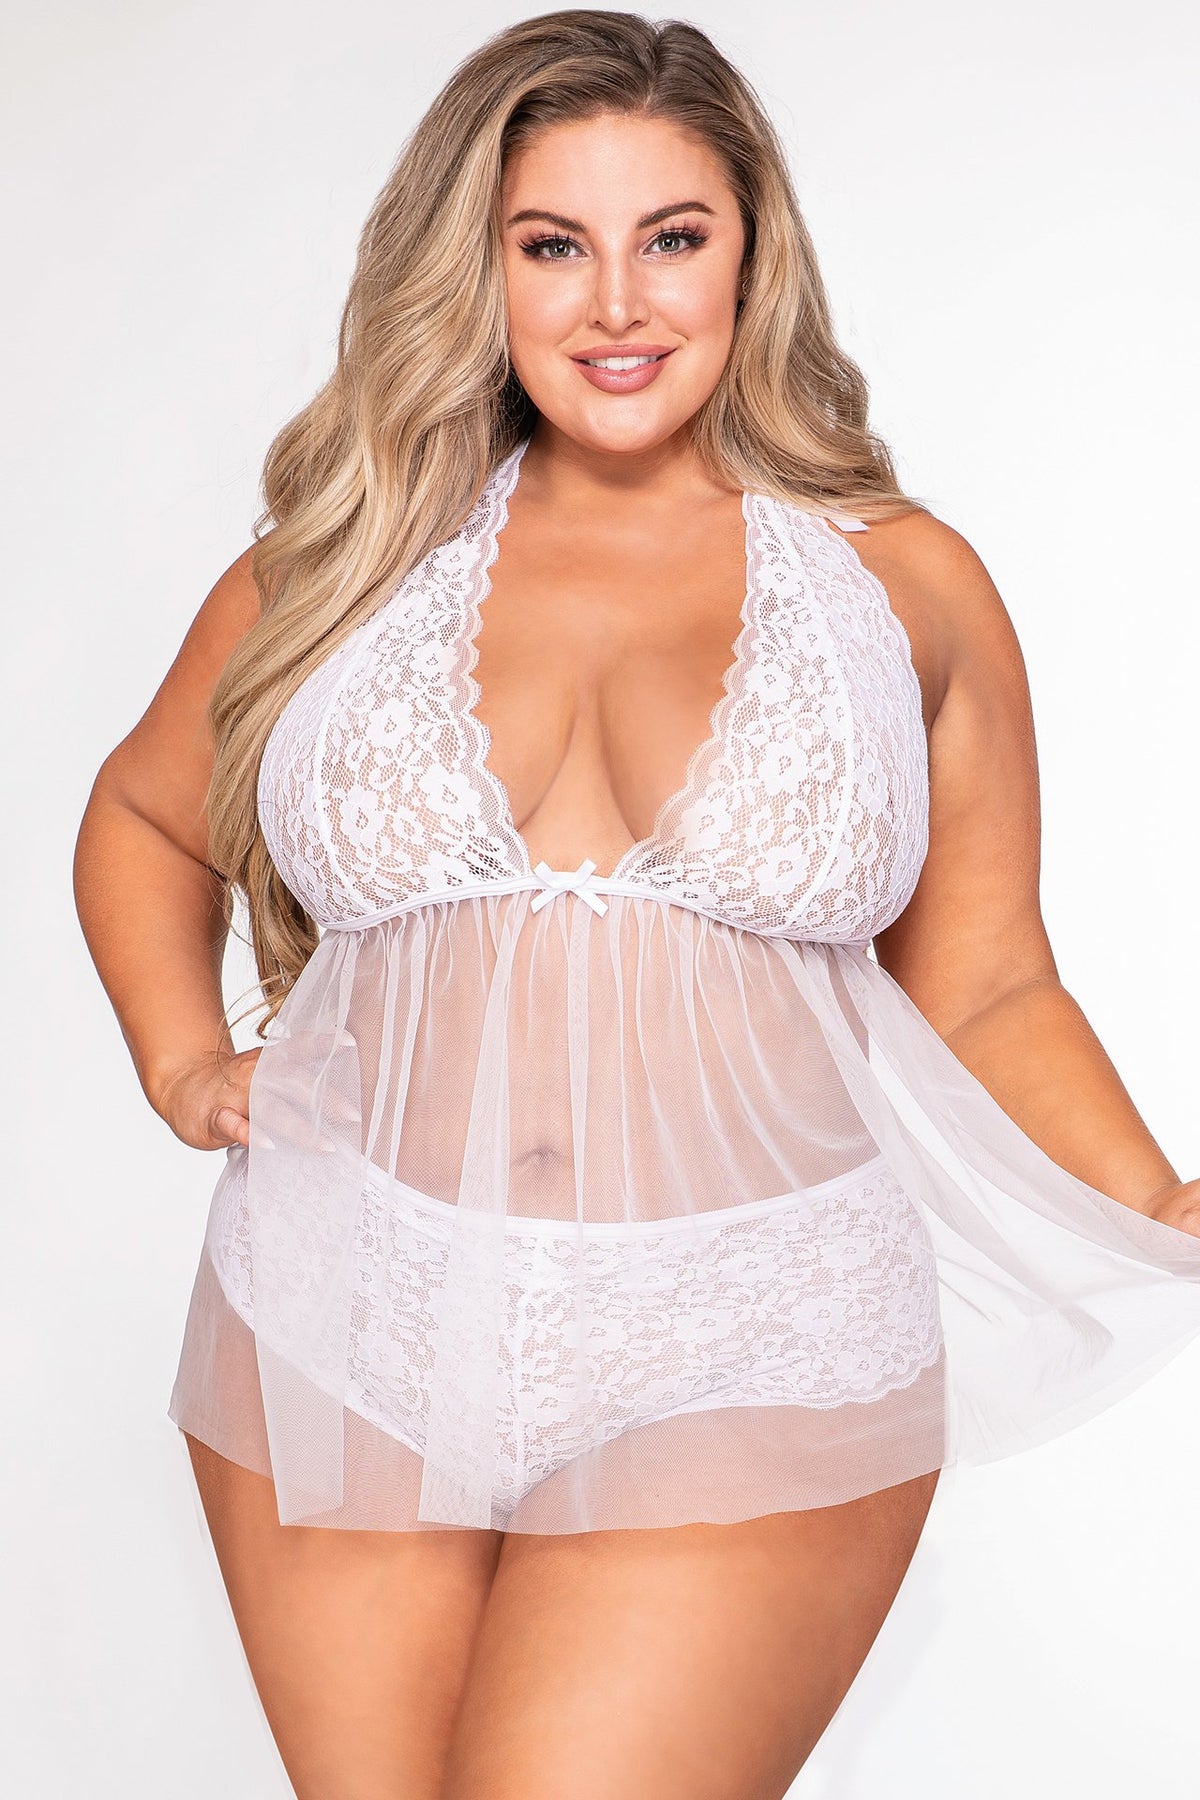 Babydoll Lingerie for D Cup and up sizes